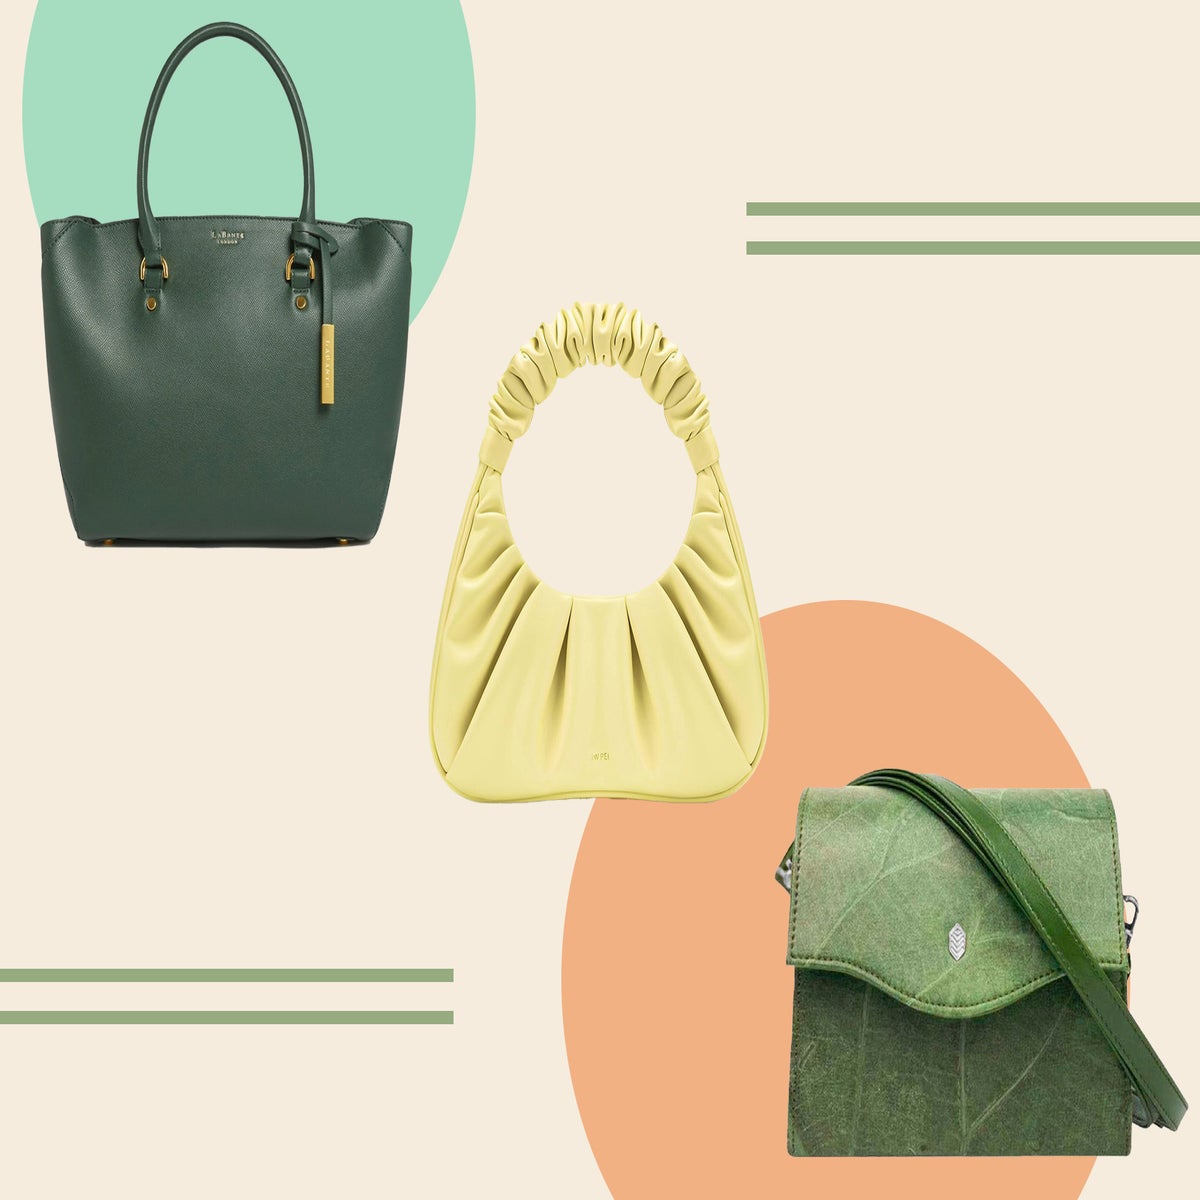 Handbags from independent designers